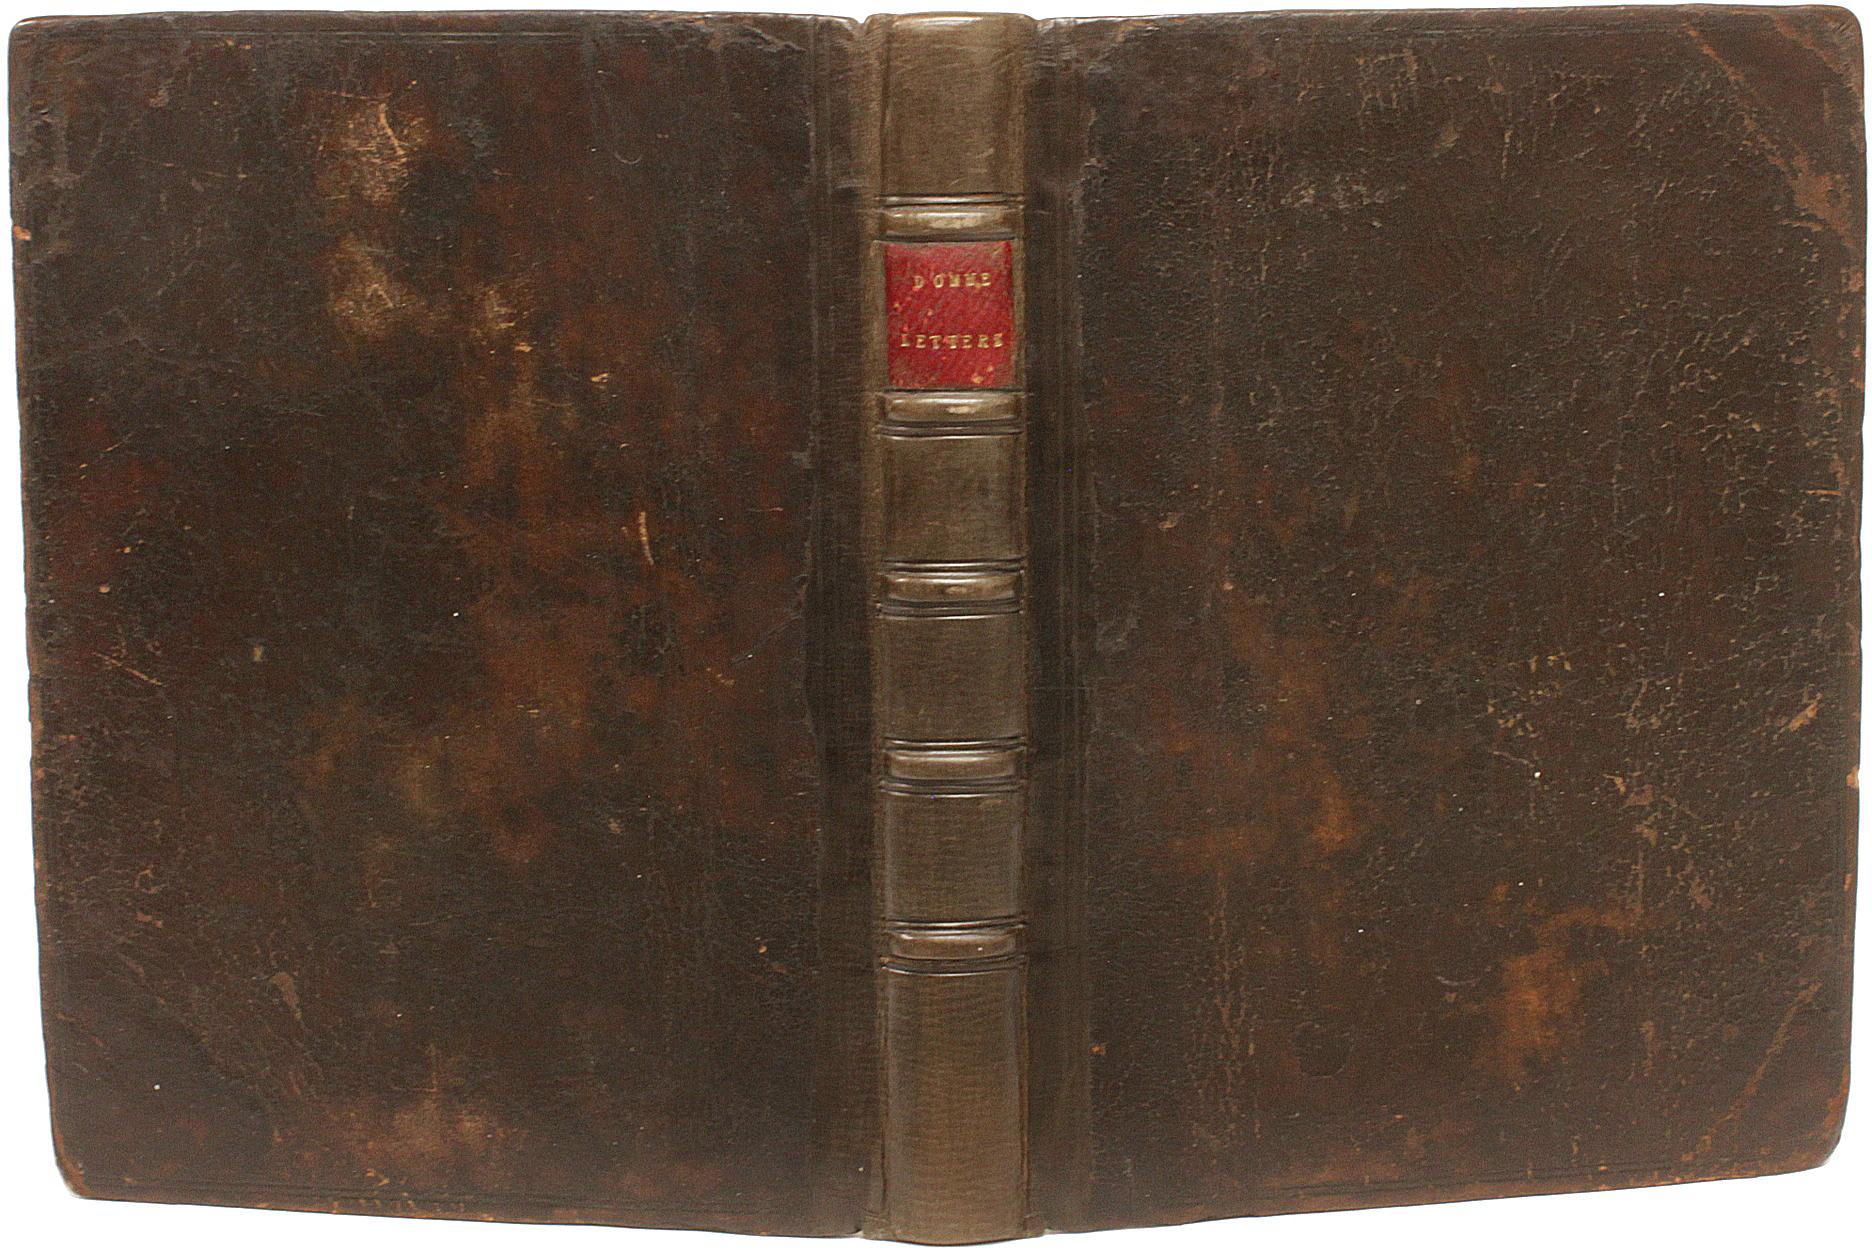 Mid-17th Century John DONNE. Letters to Severall Persons of Honour. 1st ED FIRST ISSUE - 1651